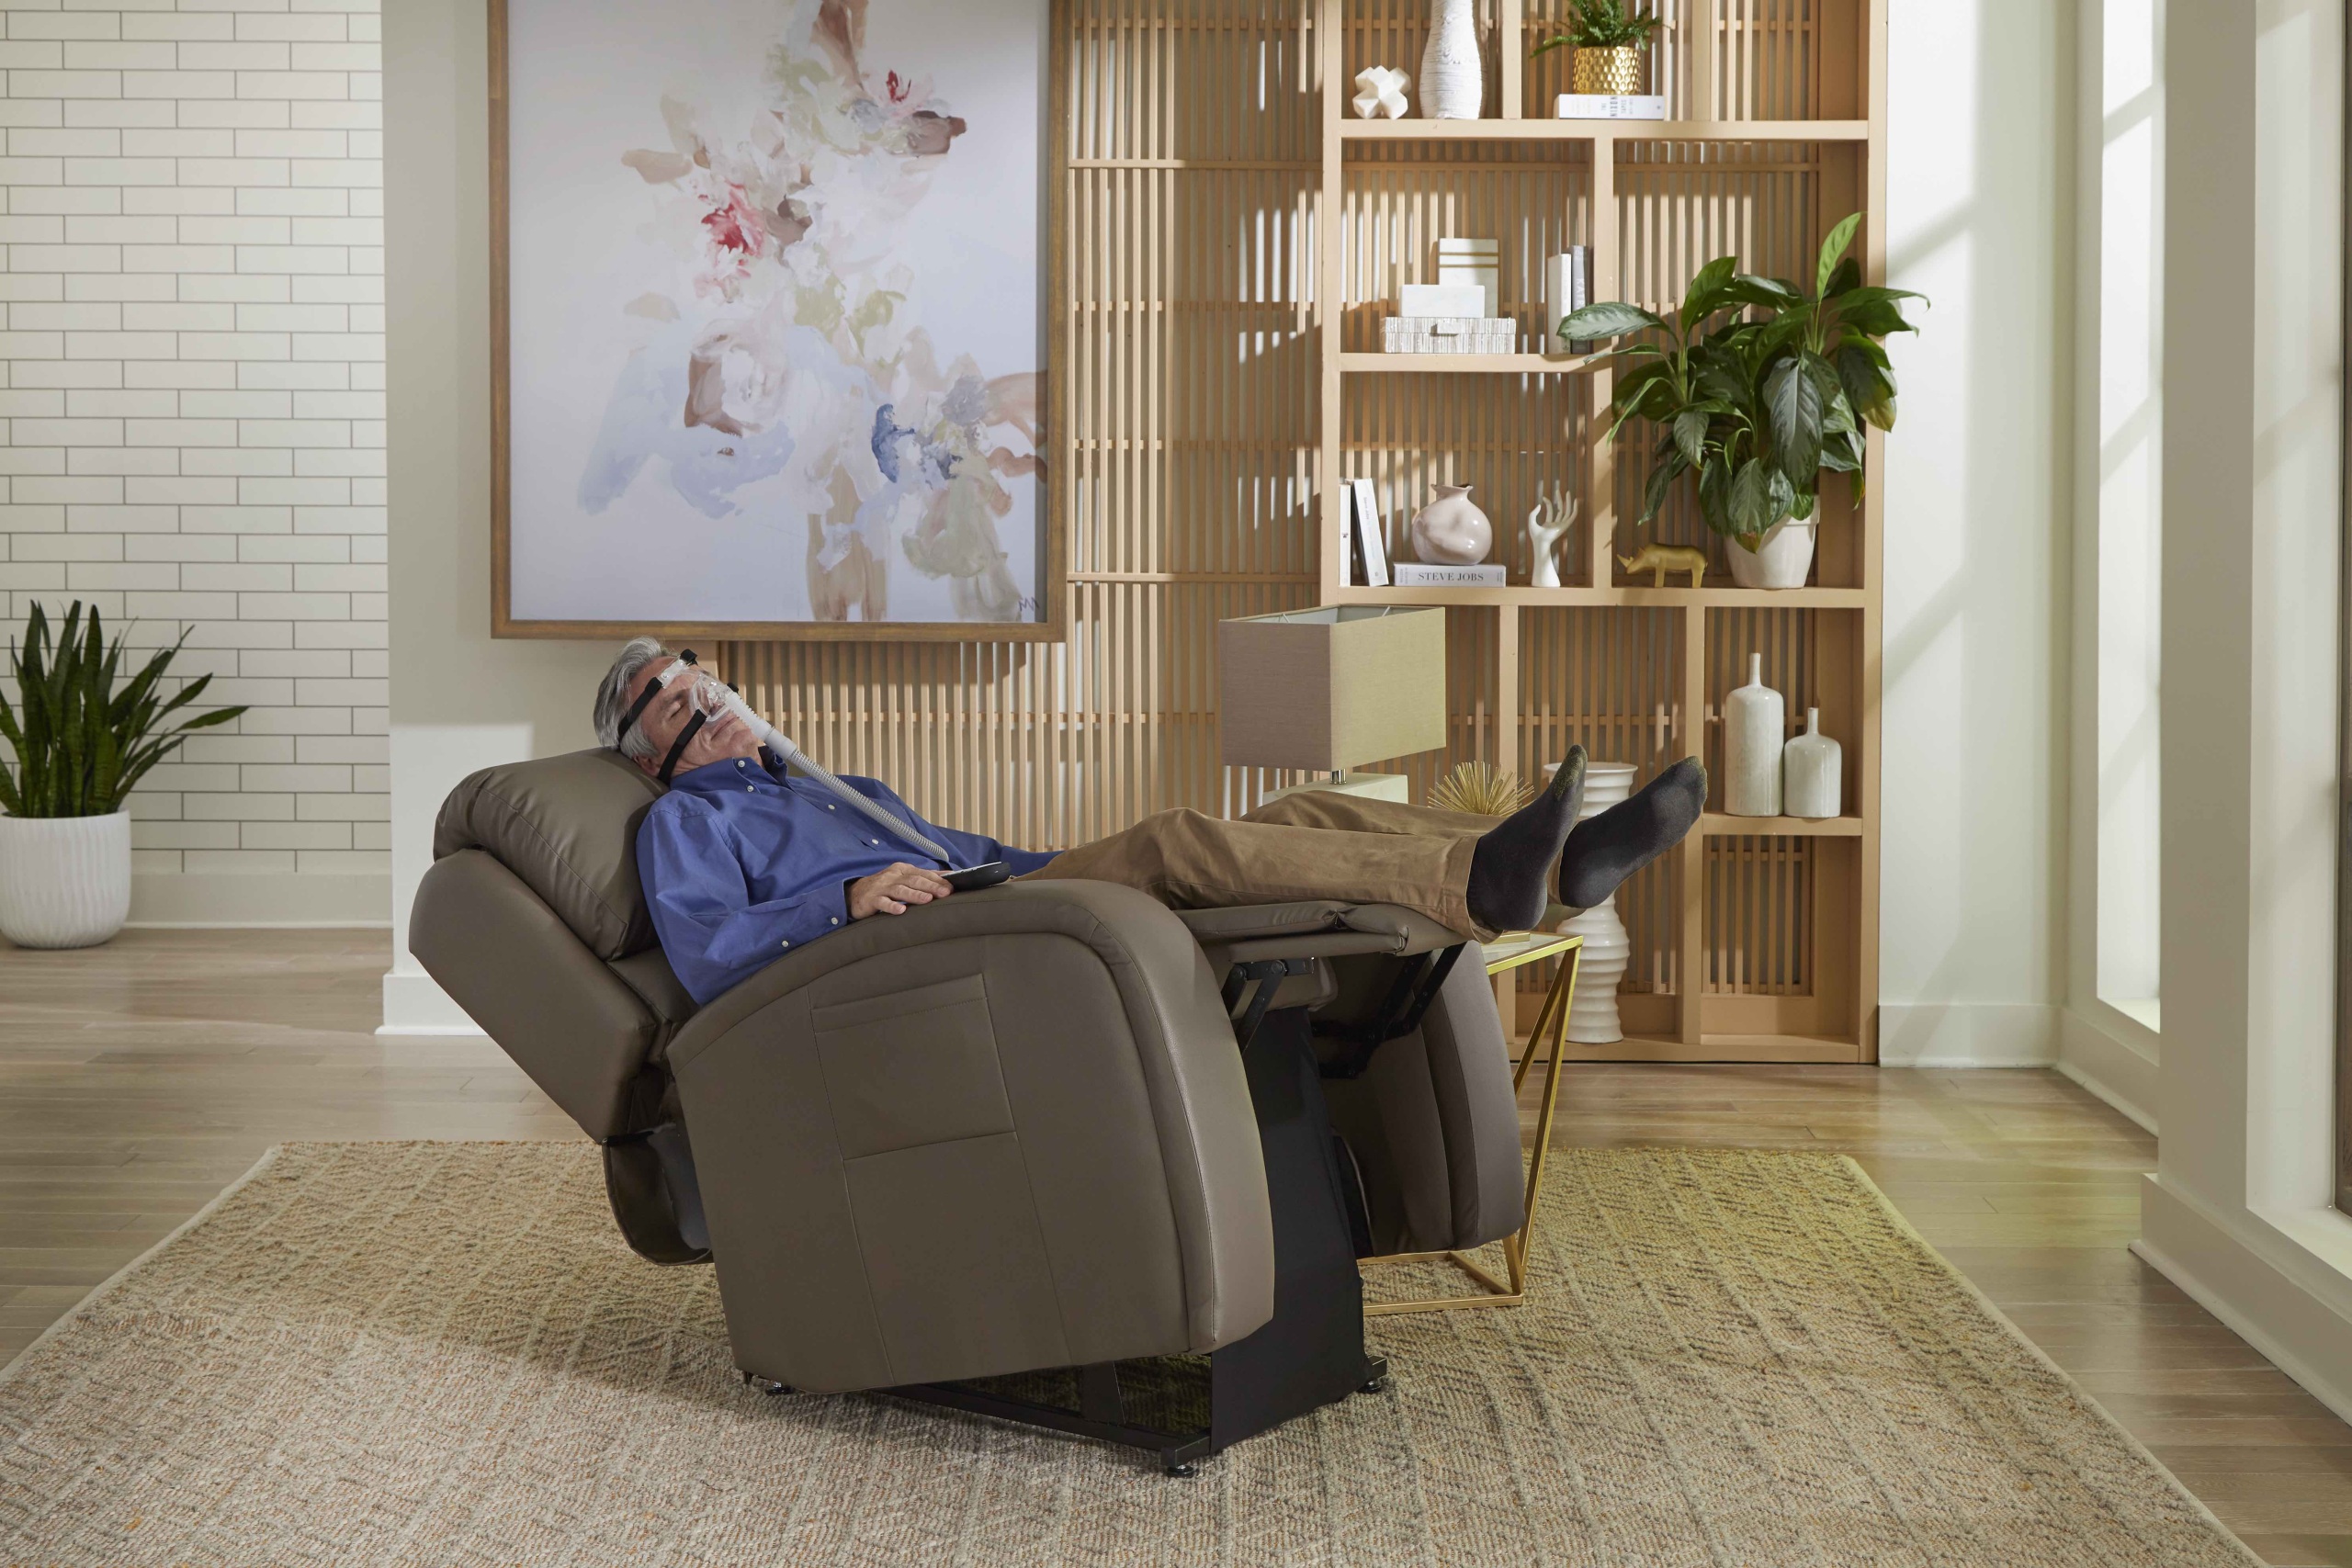 Electric Sleeper Recliner Chair | American Medical & Equipment Supply